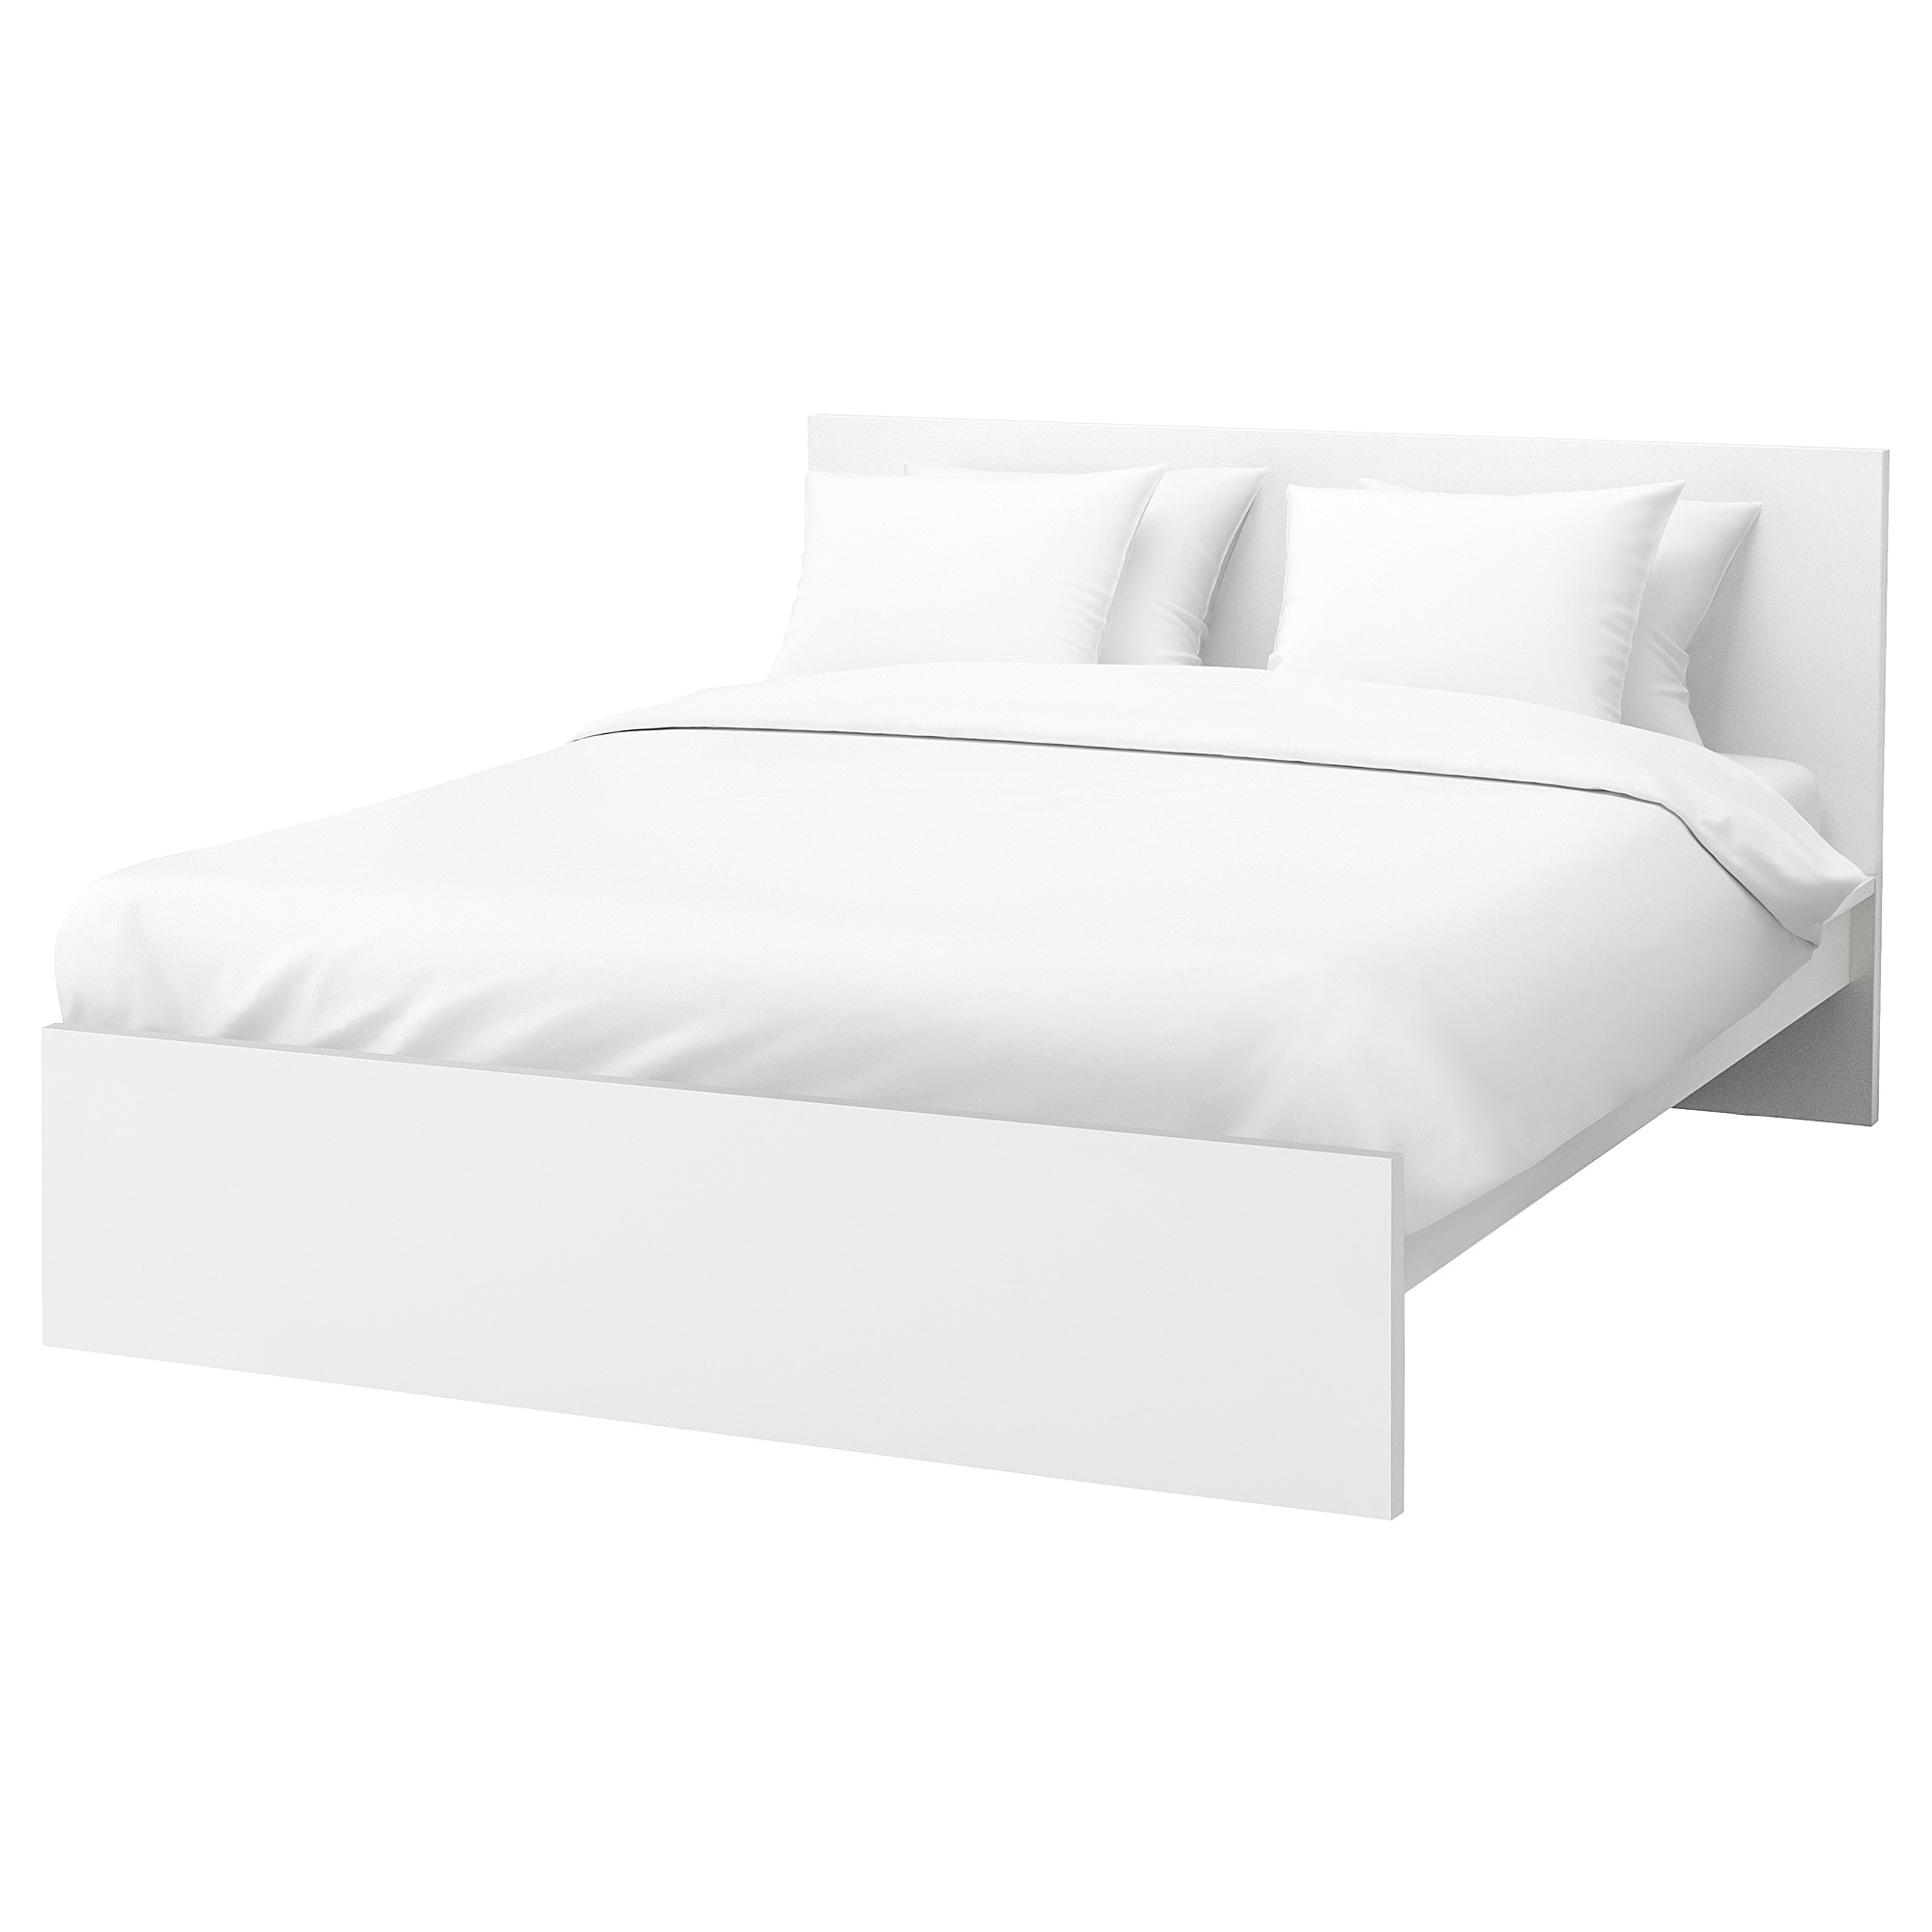 ikea malm bed frame high adjustable bed sides allow you to use mattresses of different